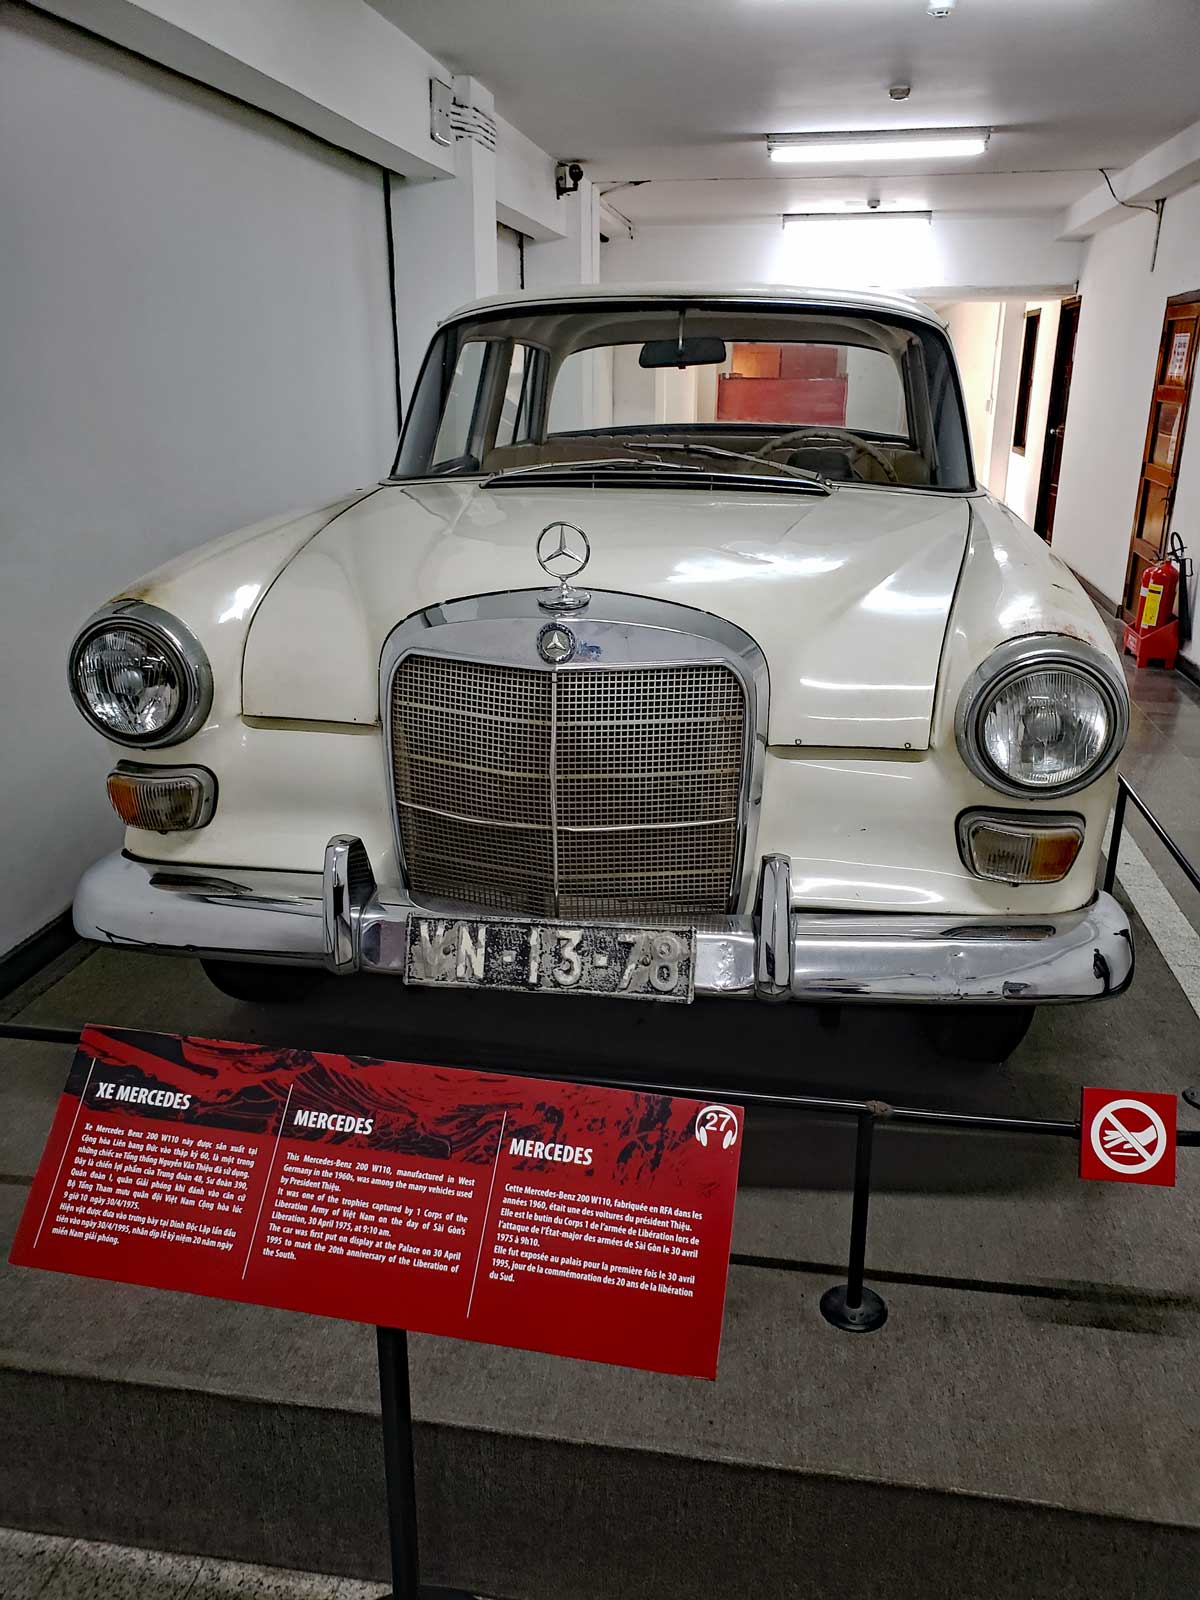 This Mercedes Benz 200 was also frequently used by the South Vietnamese President.